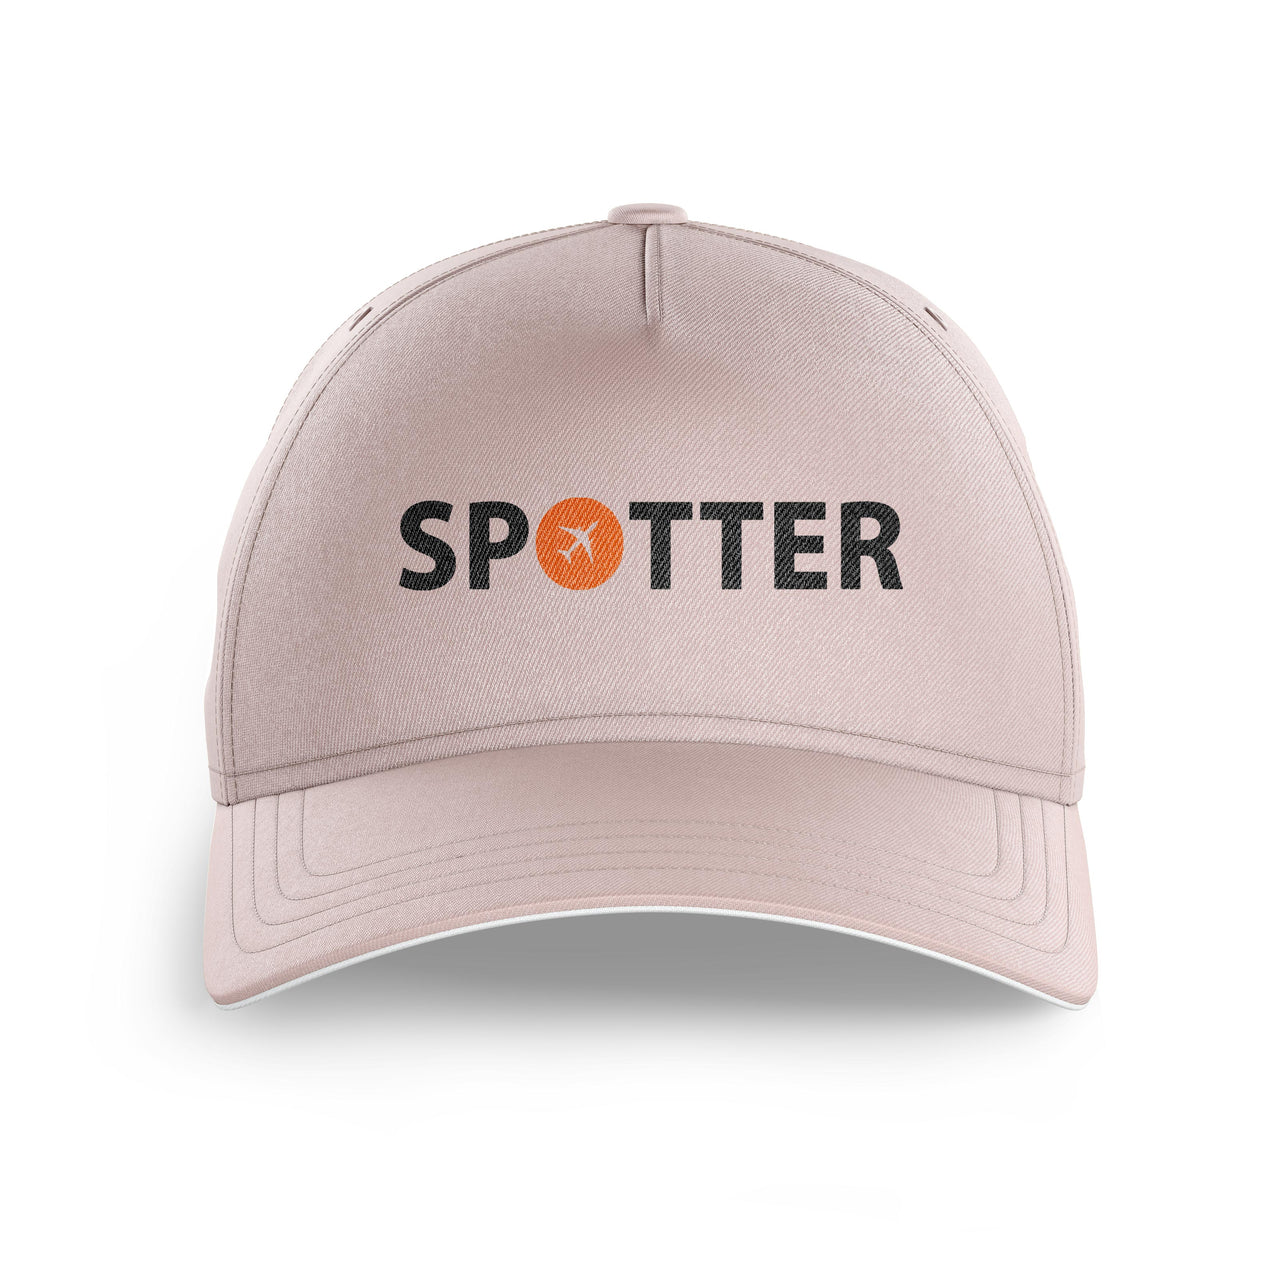 Spotter Printed Hats